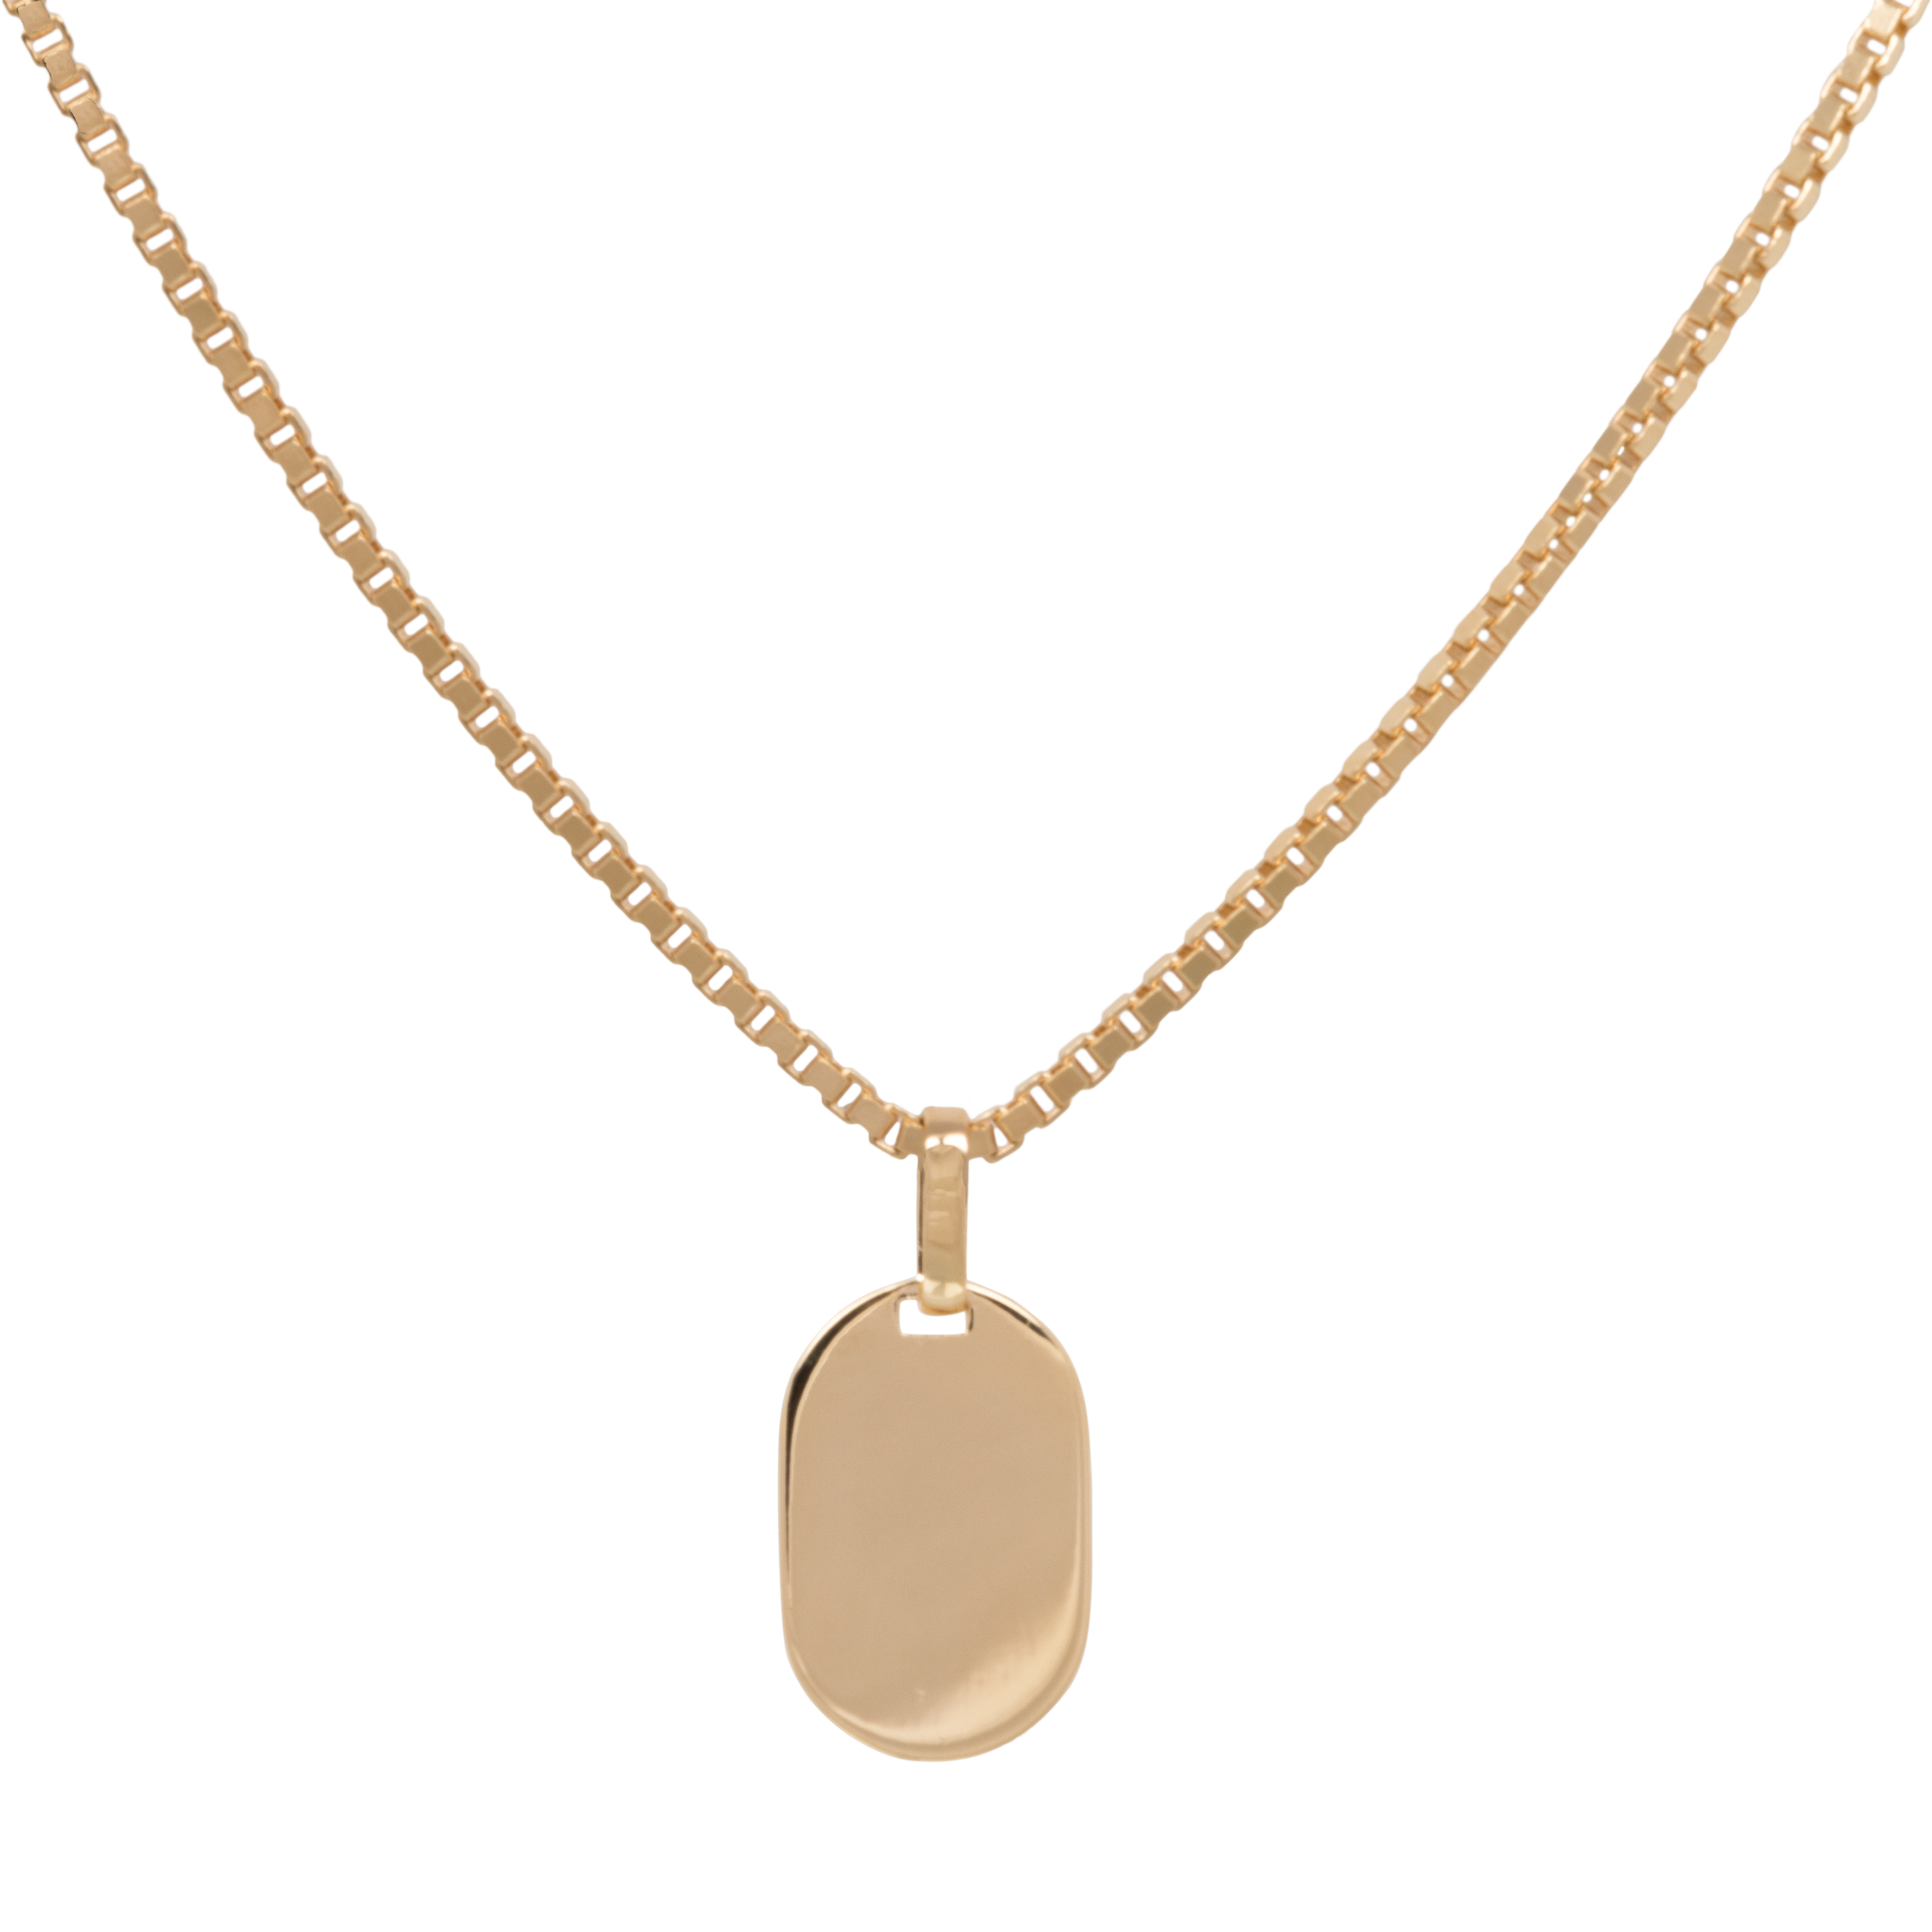 Minimal Oval Pendant with Box Chain